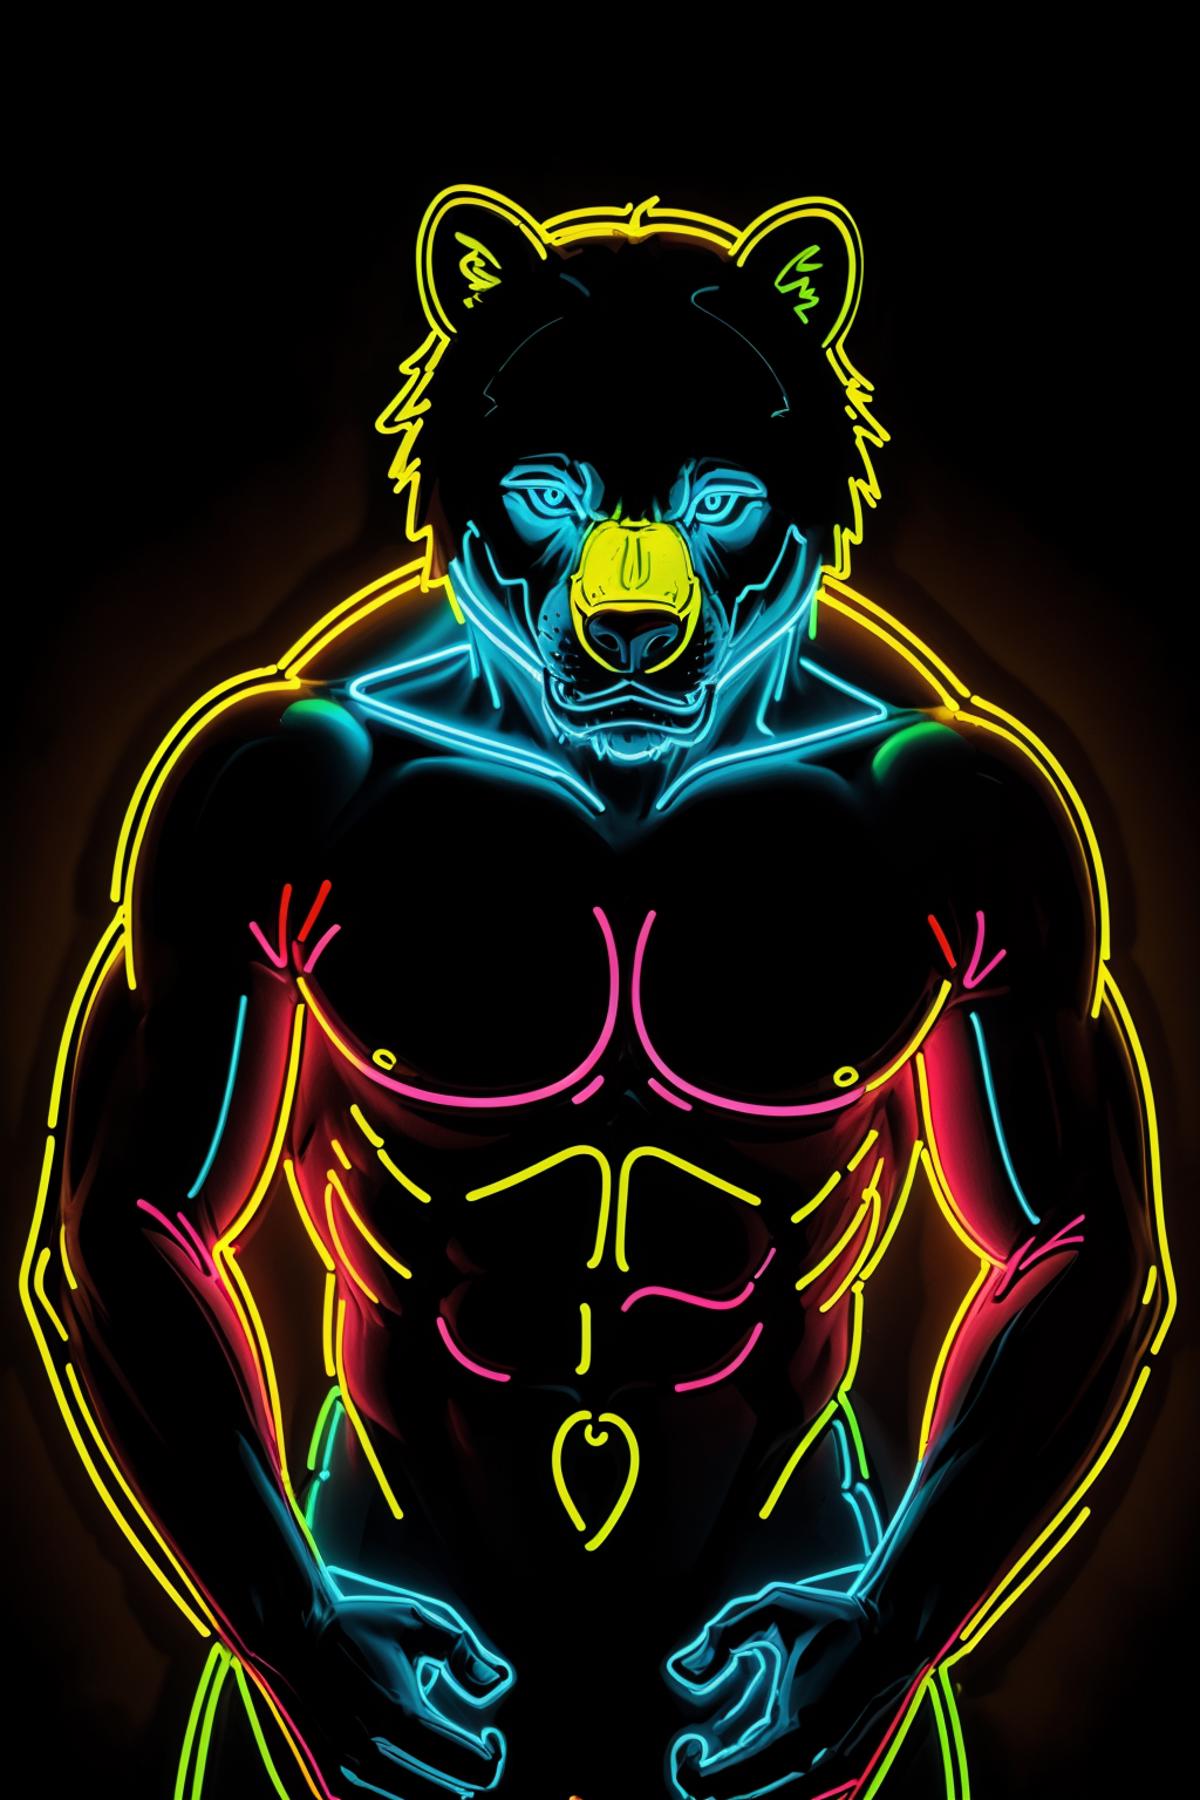 Neon Outlines image by martius72